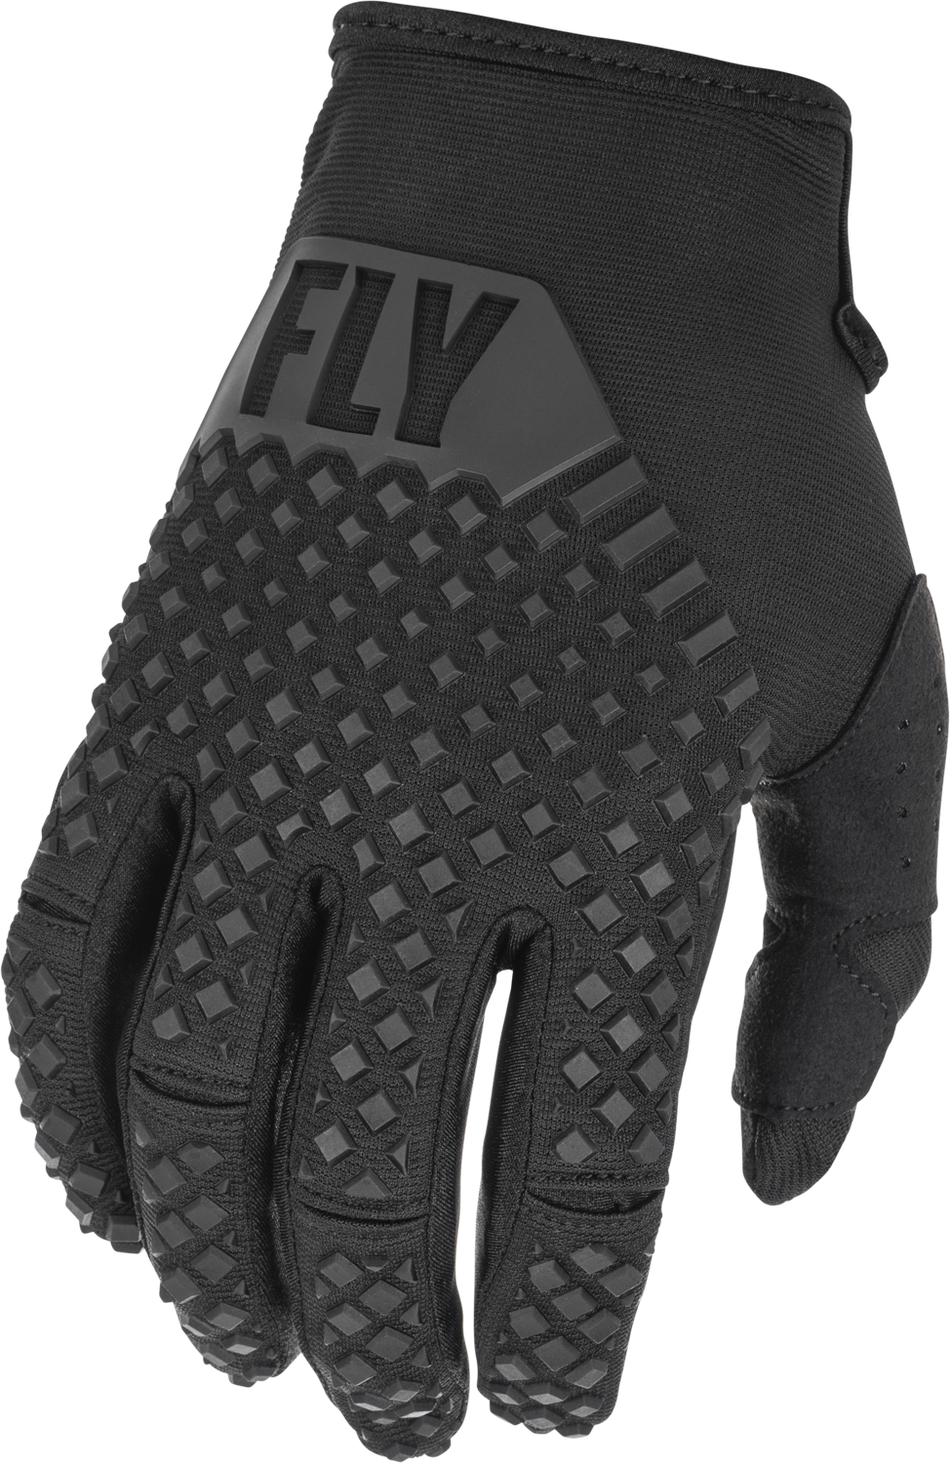 FLY RACING Kinetic Gloves Black Md 375-410M